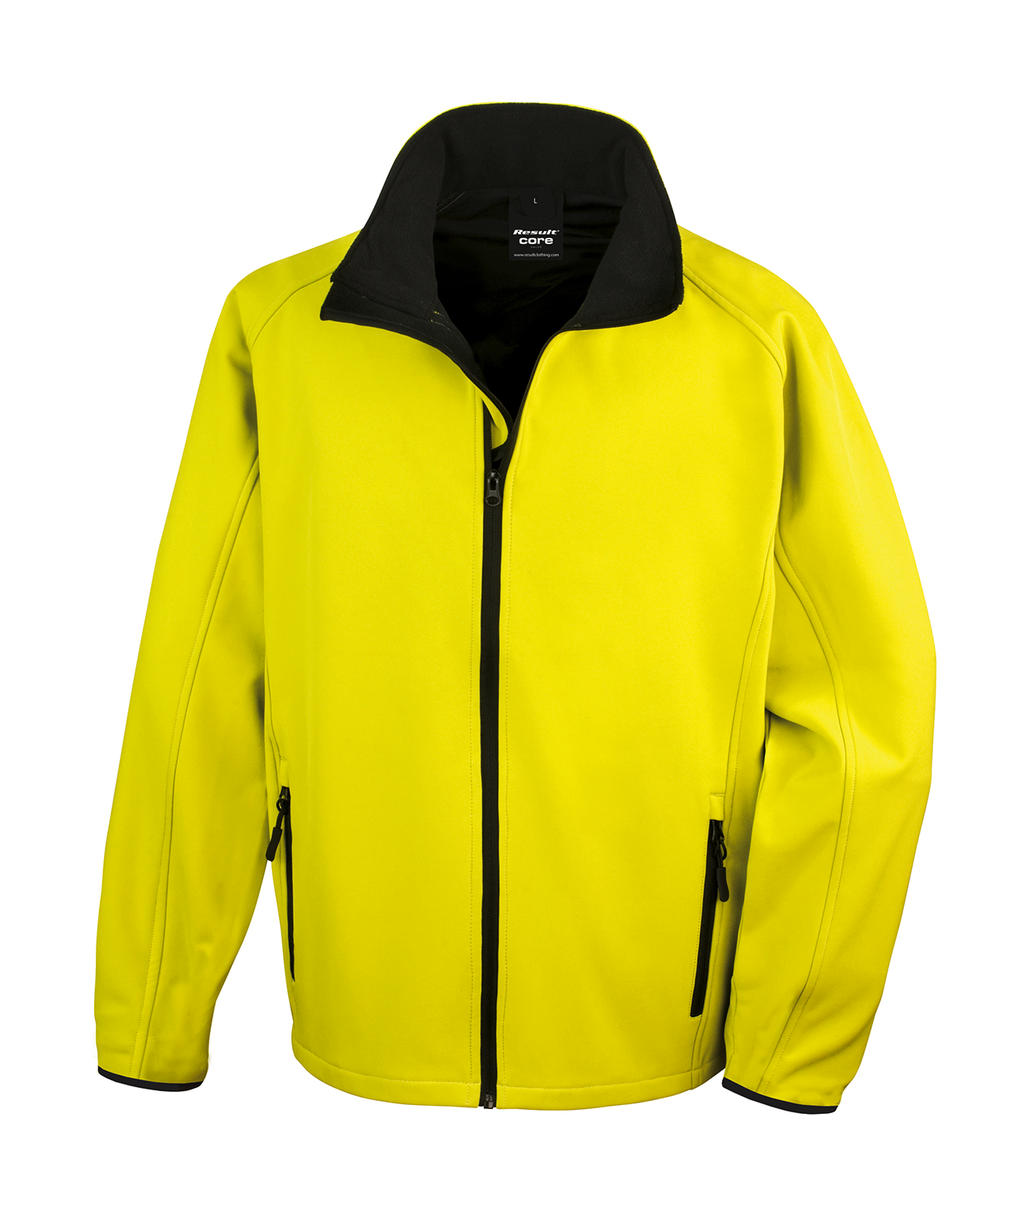  Printable Softshell Jacket in Farbe Yellow/Black